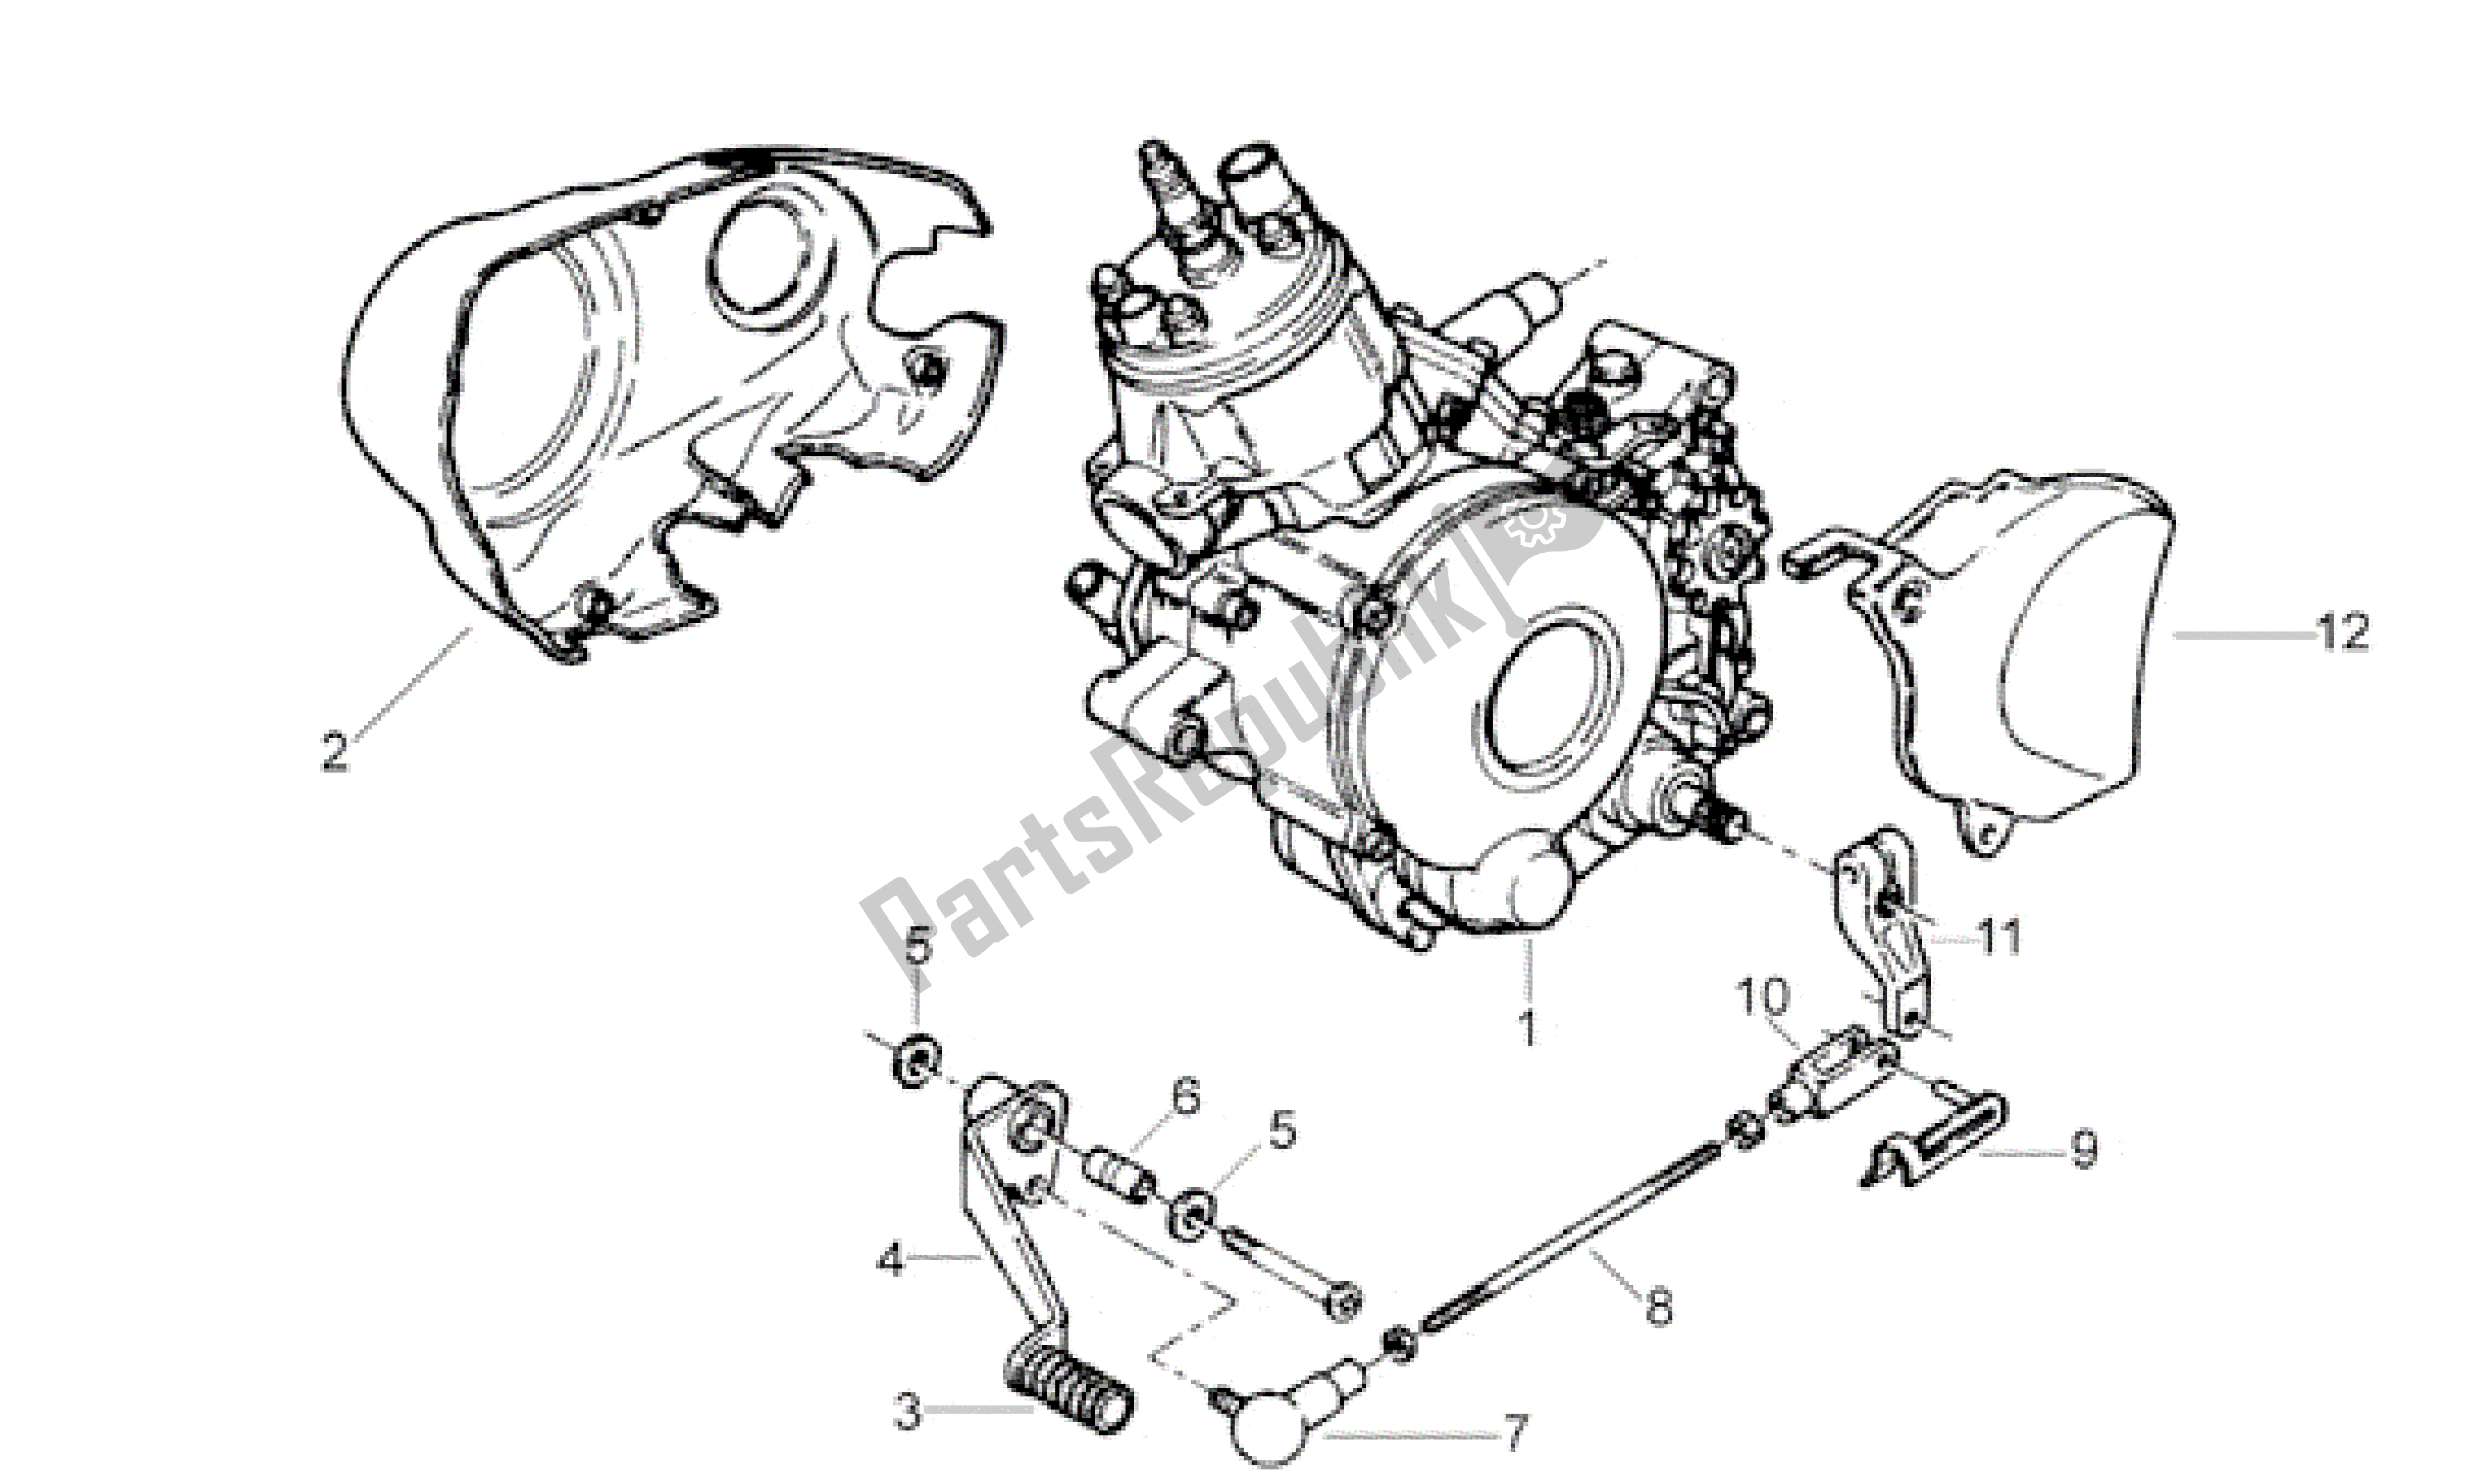 All parts for the Engine Ii of the Aprilia Classic 50 1992 - 1999